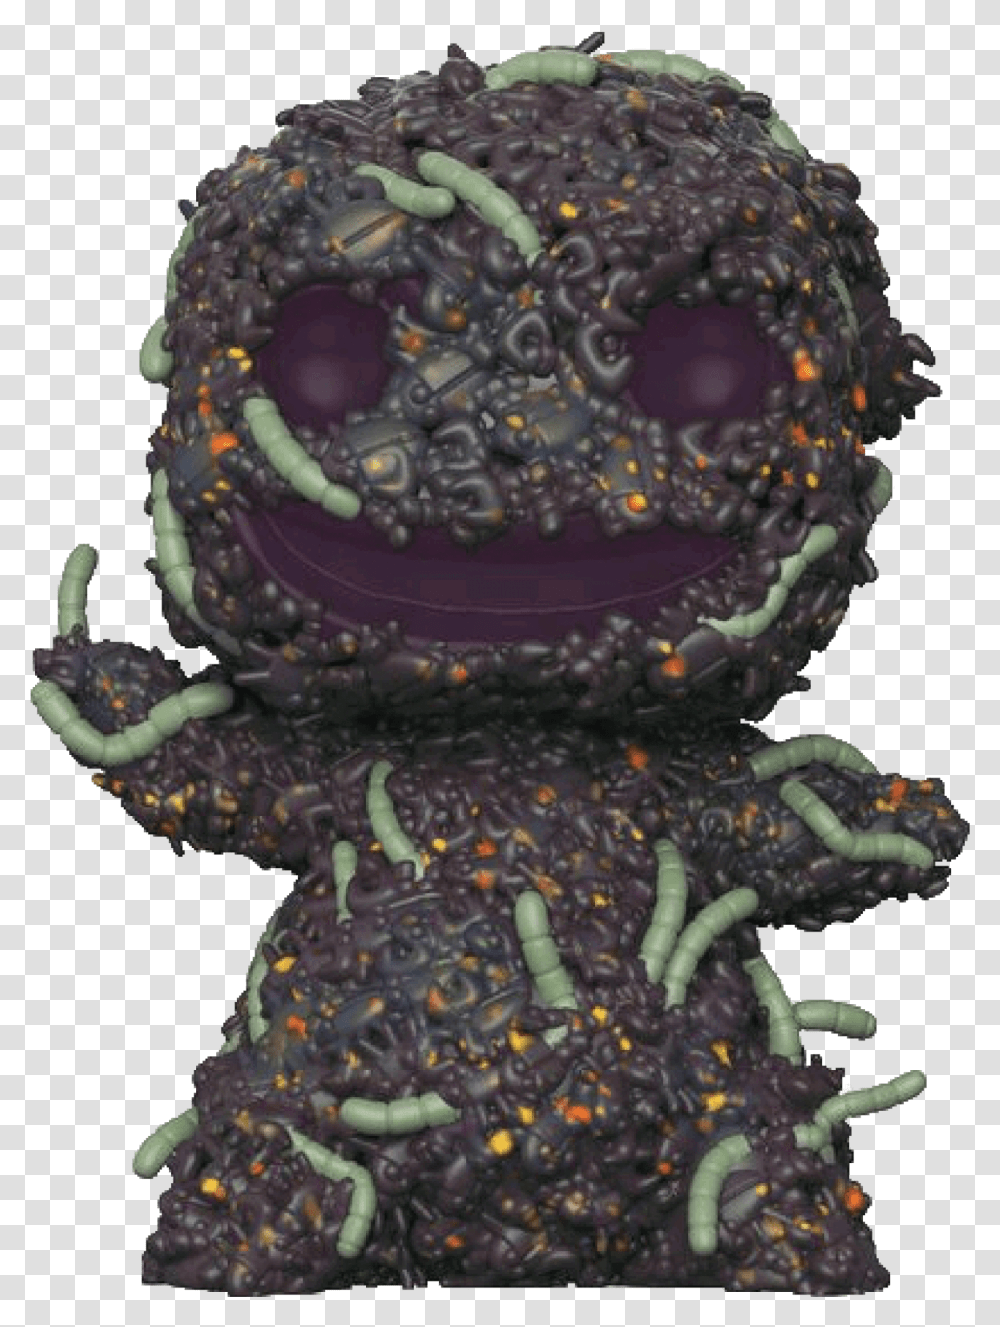 Funko Pop Oogie Boogie With Bugs, Figurine, Animal, Birthday Cake, Food Transparent Png